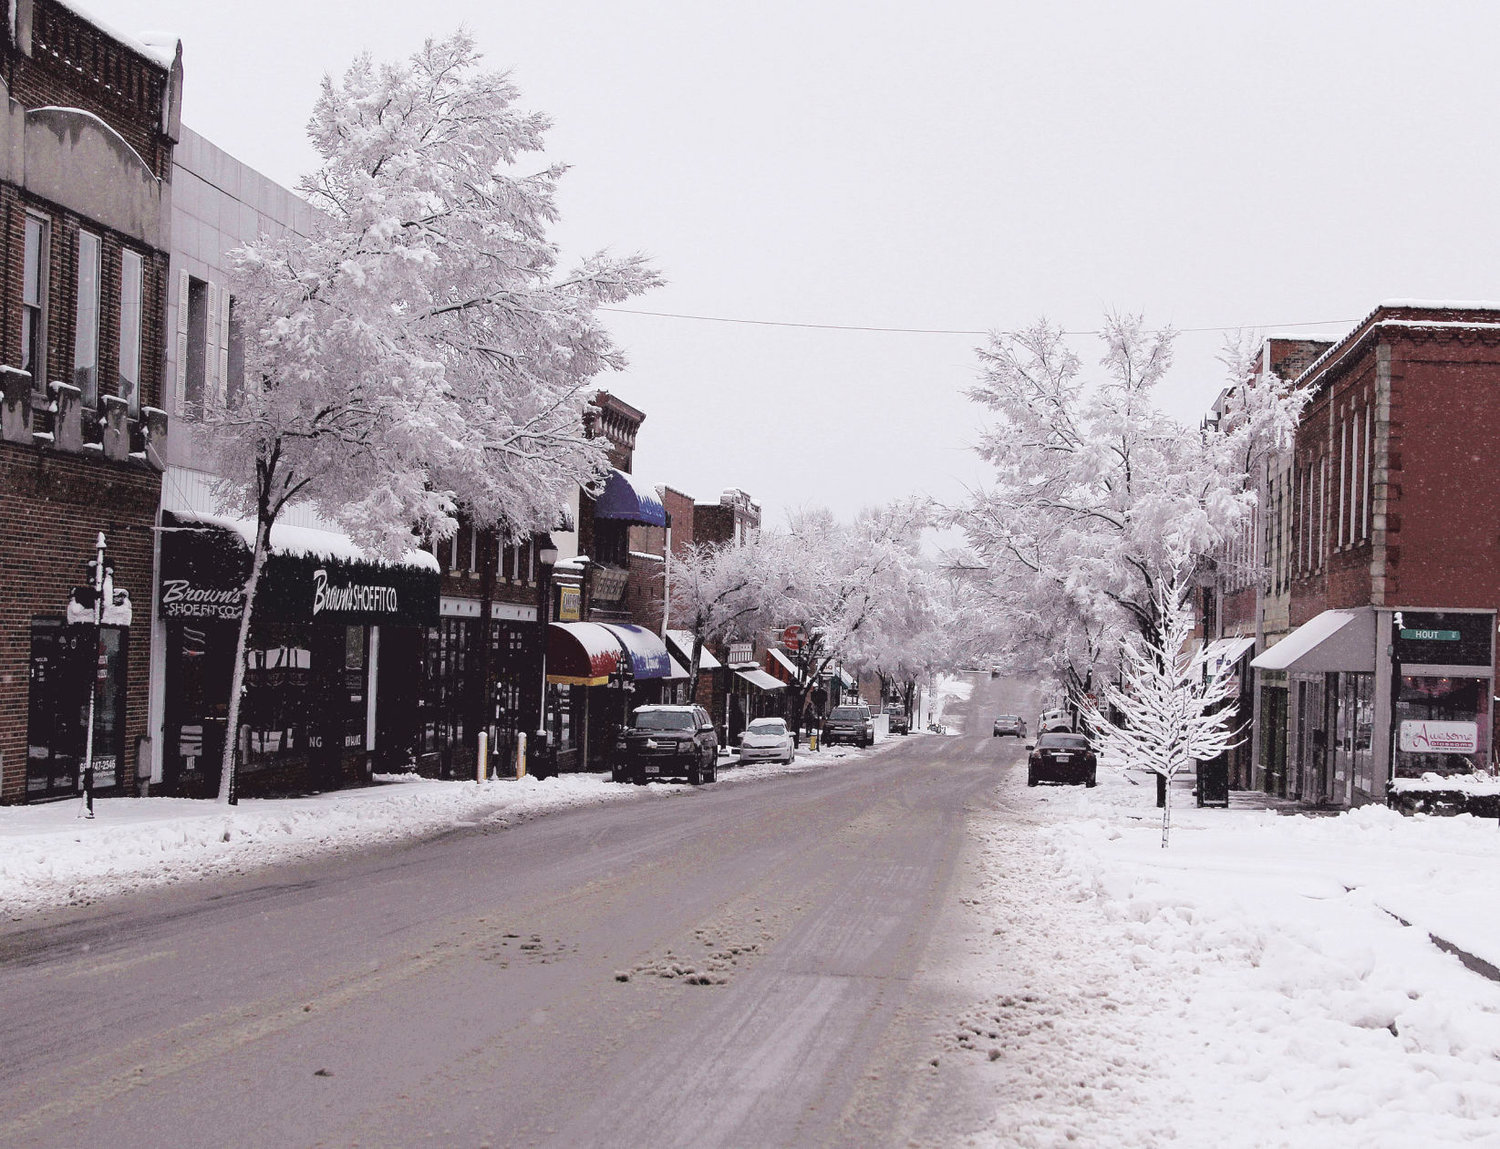 Snow covers the trees in downtown Warrensburg in January 2020.